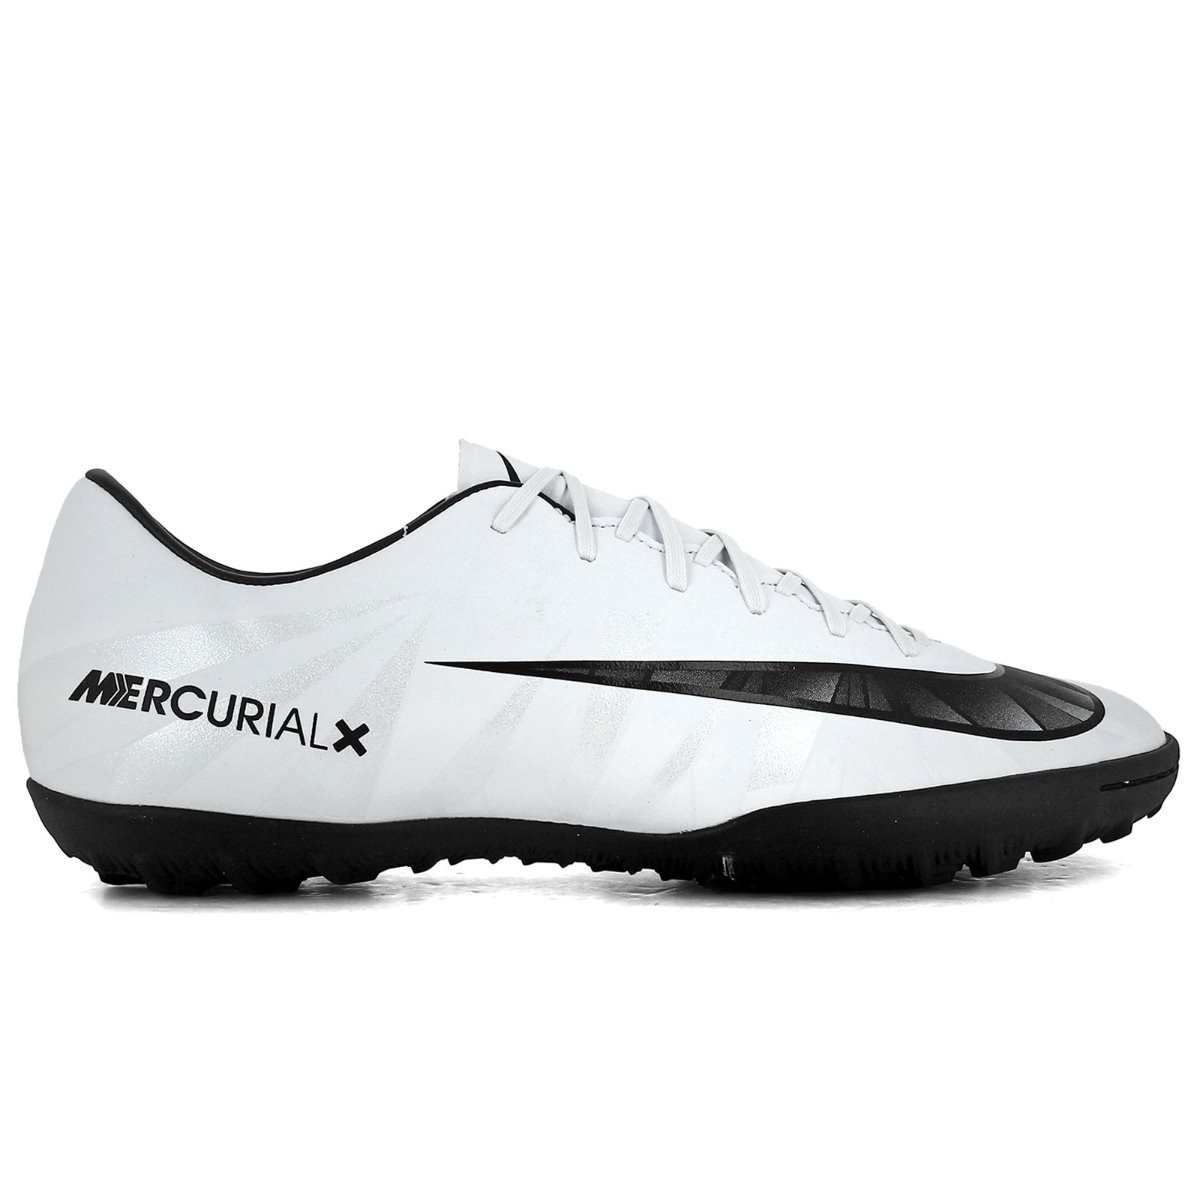 tenis cr7 blancos Cheaper Than Retail Price\u003e Buy Clothing, Accessories and  lifestyle products for women \u0026 men -